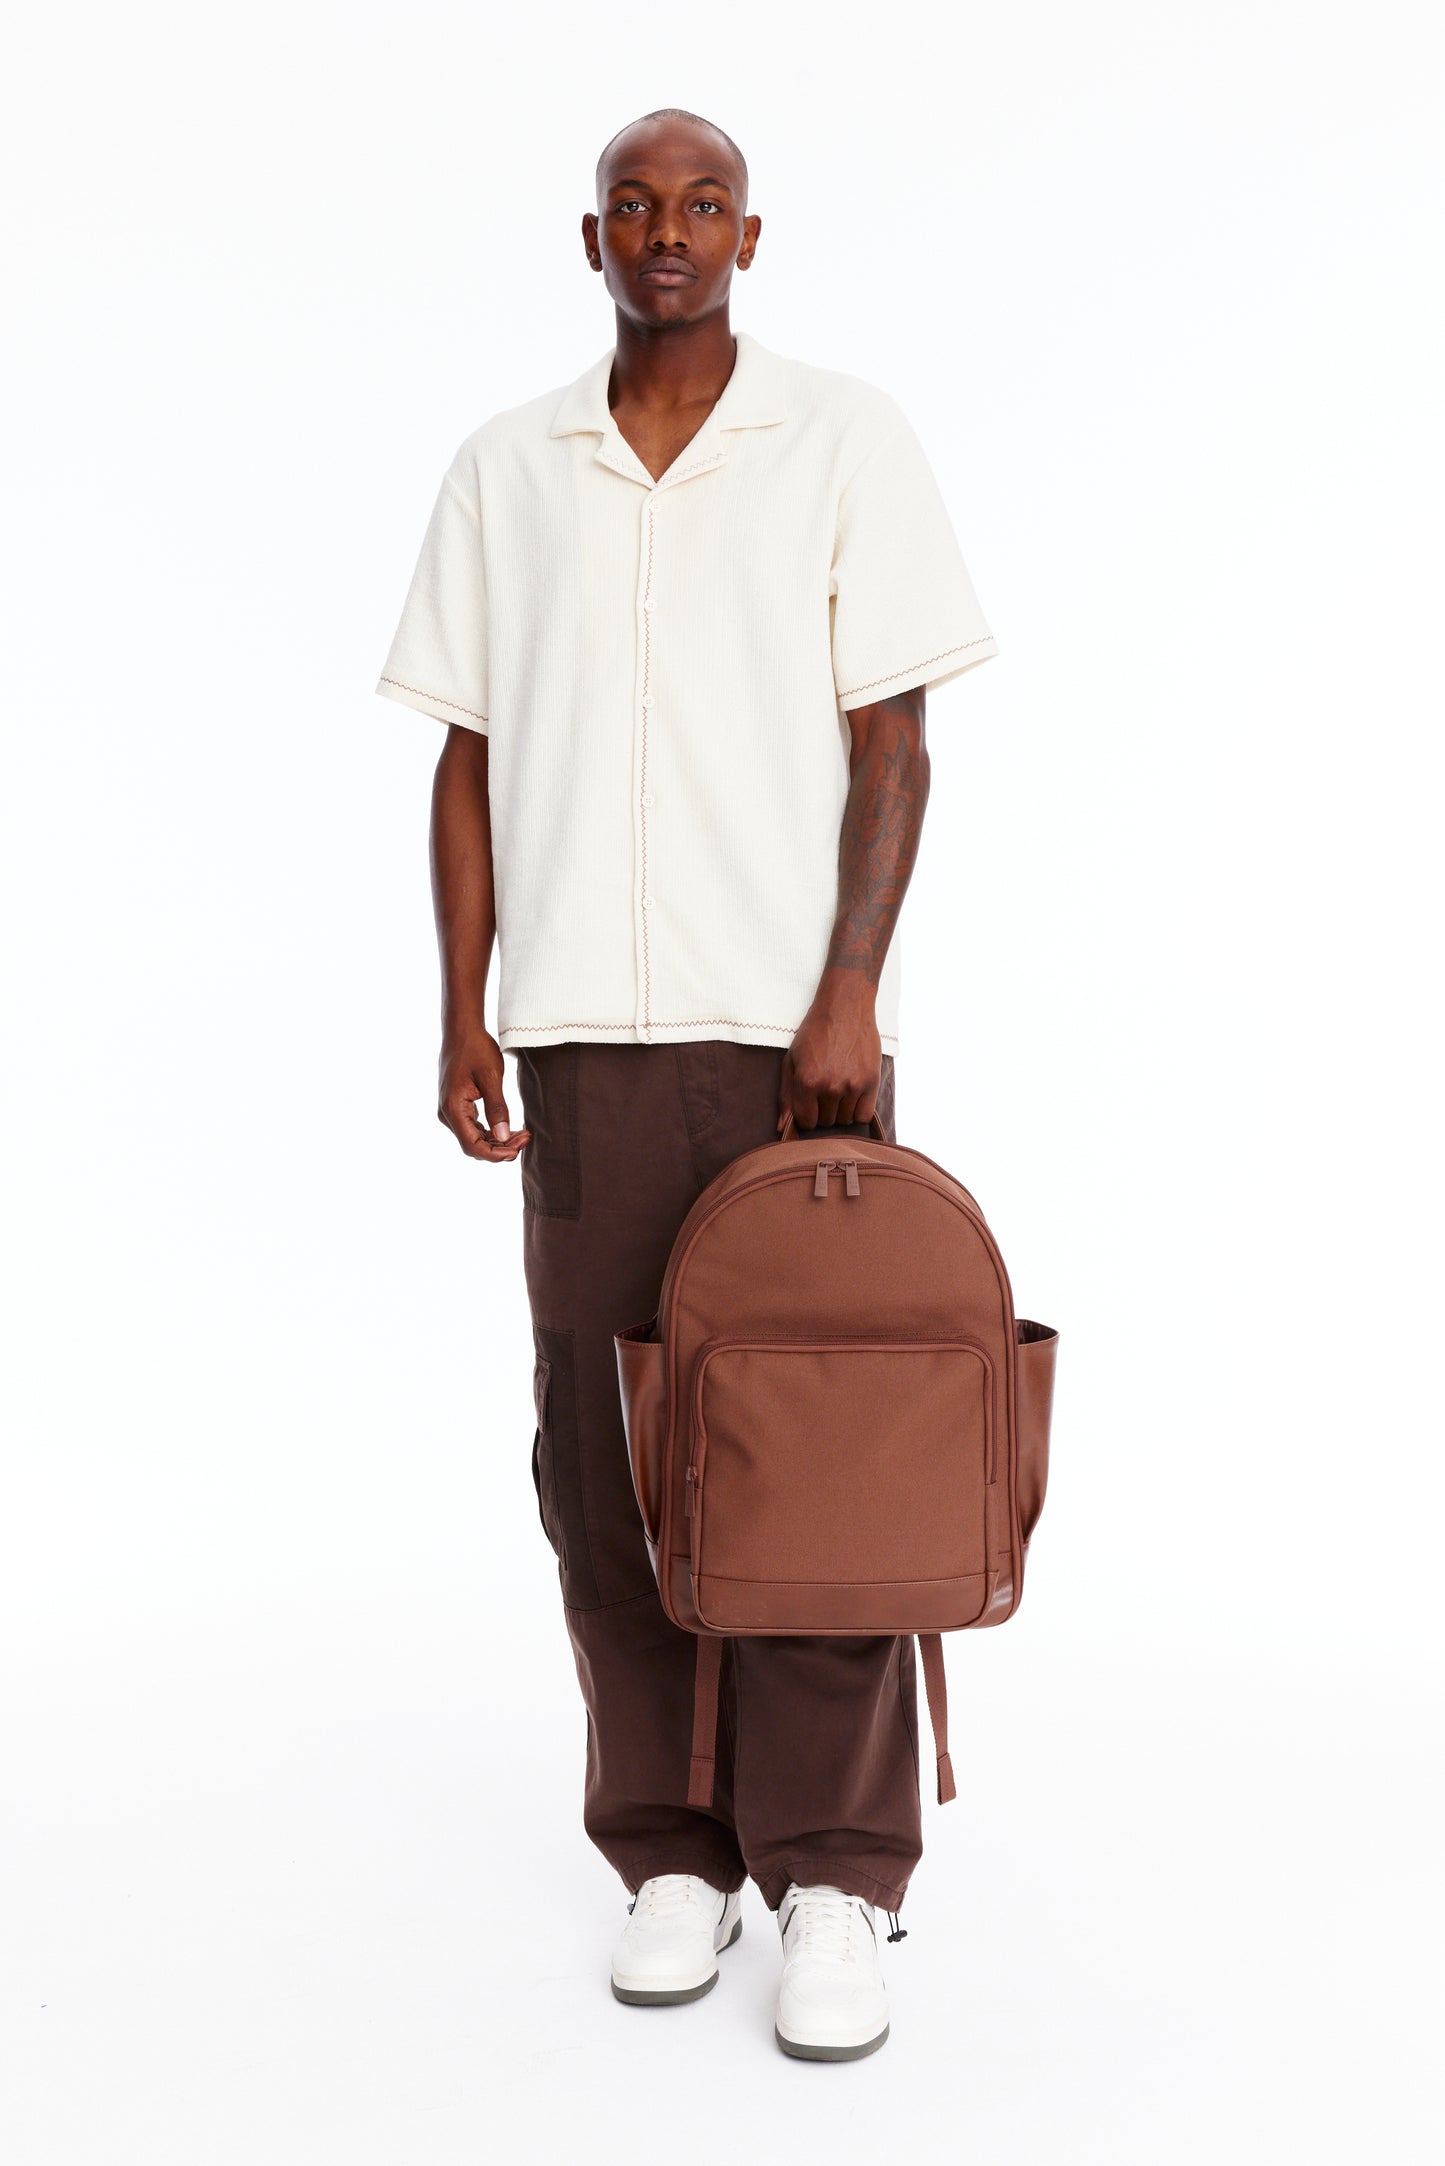 BÉIS 'The Backpack' in Maple - Brown Laptop Backpack For Work & Travel